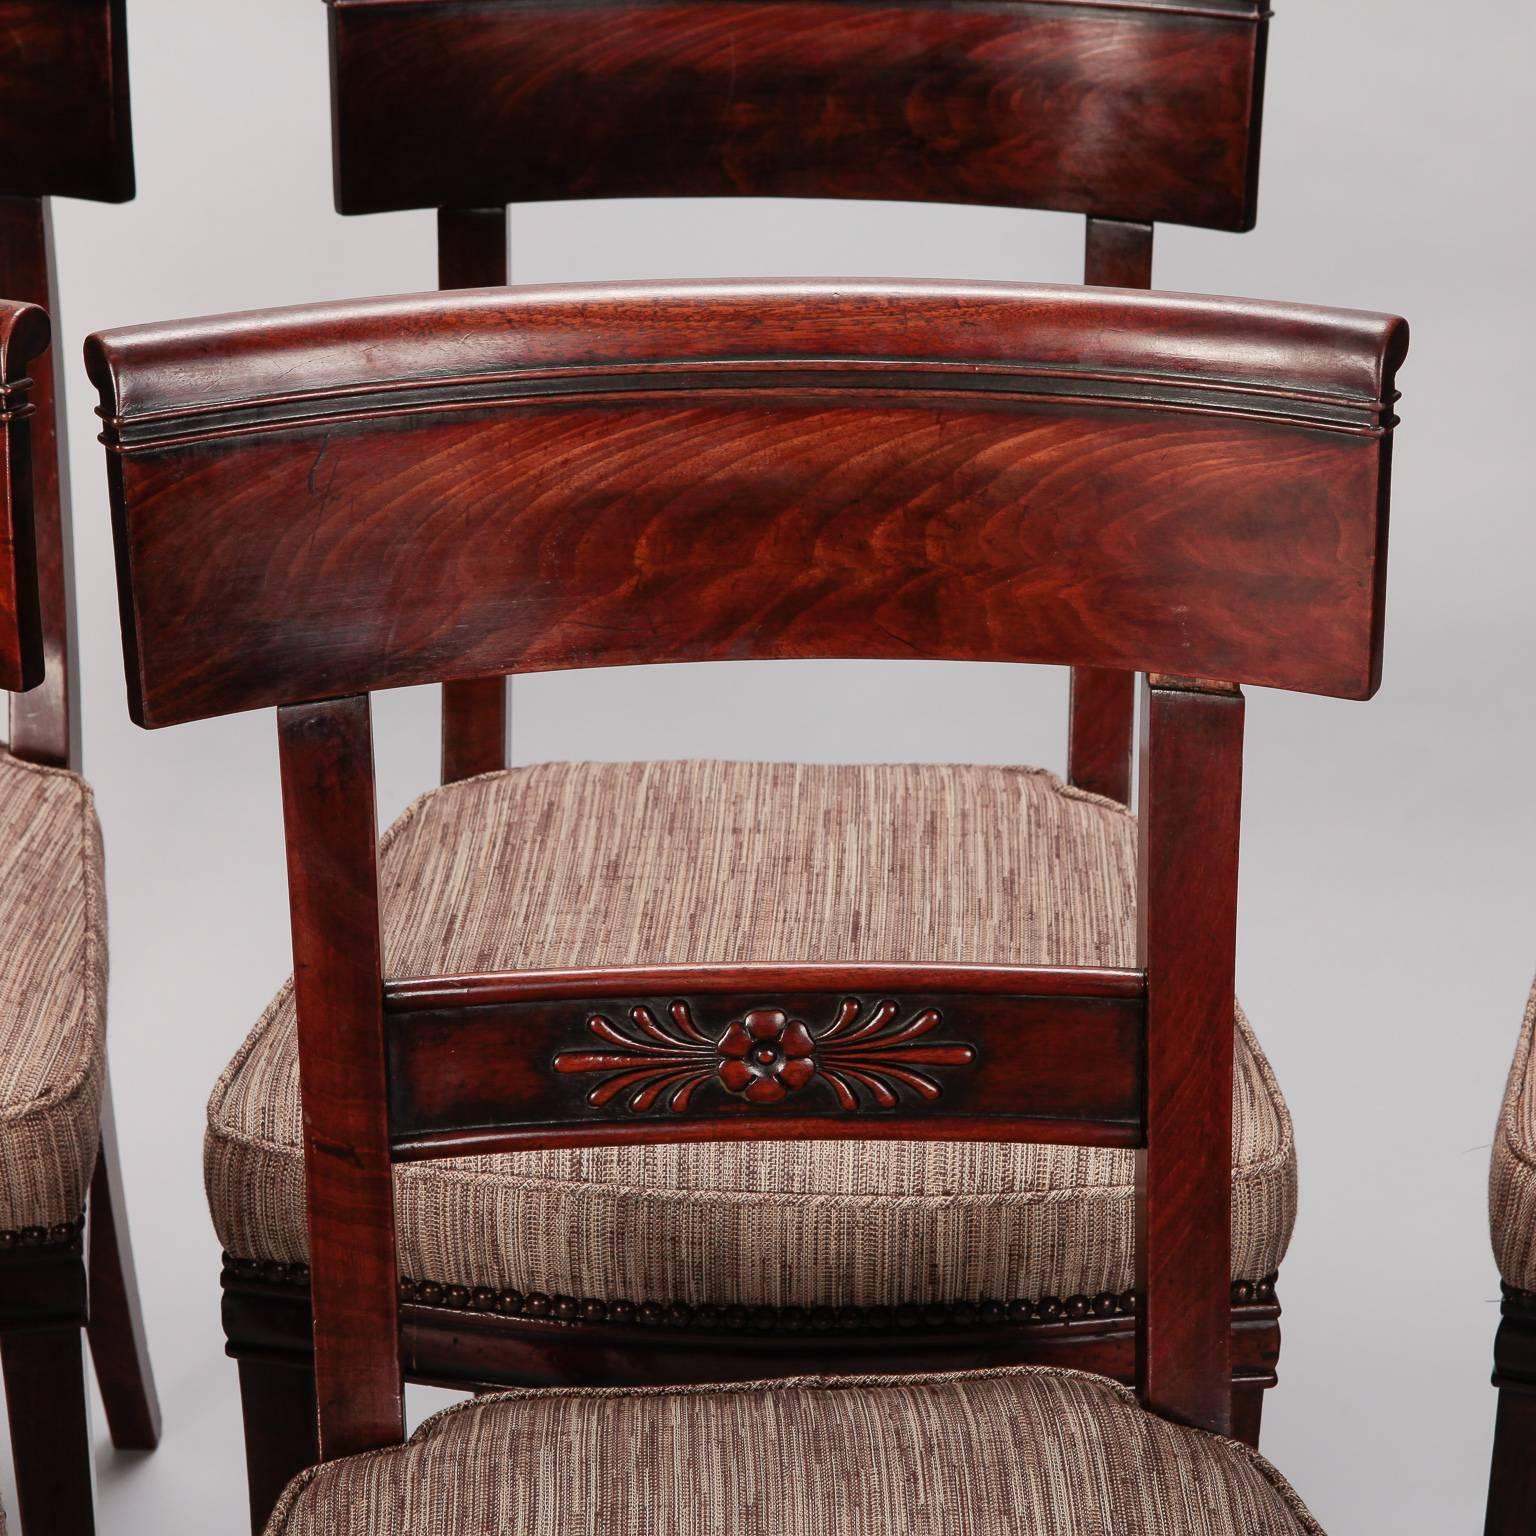 Set of six French dining chairs with newly upholstered seats and carved walnut frames, circa 1825. Newly upholstered in brown tone tweedy woven fabric with brass nail head trim. Carved floral medallion detail on seat back slats. Measure: Seats are